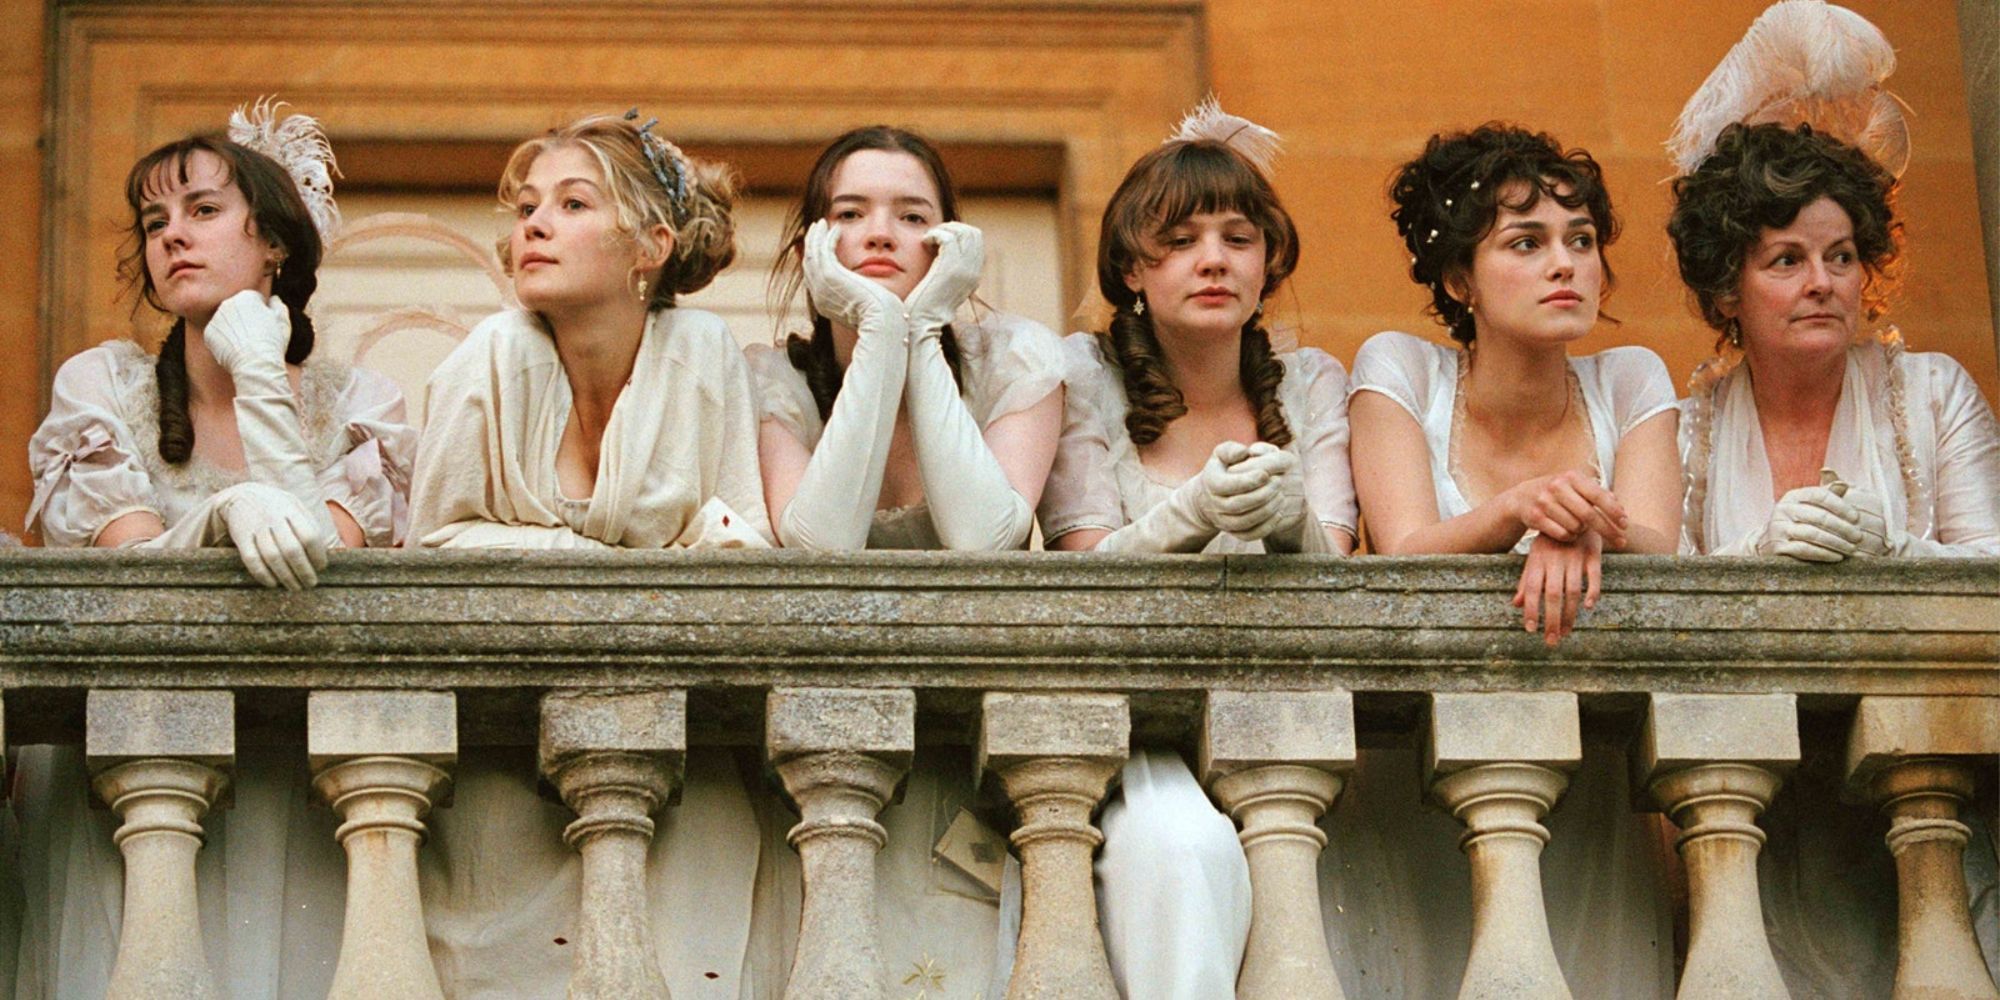 Little Women And 9 Other Films Featuring Jacqueline Durran’s Costumes